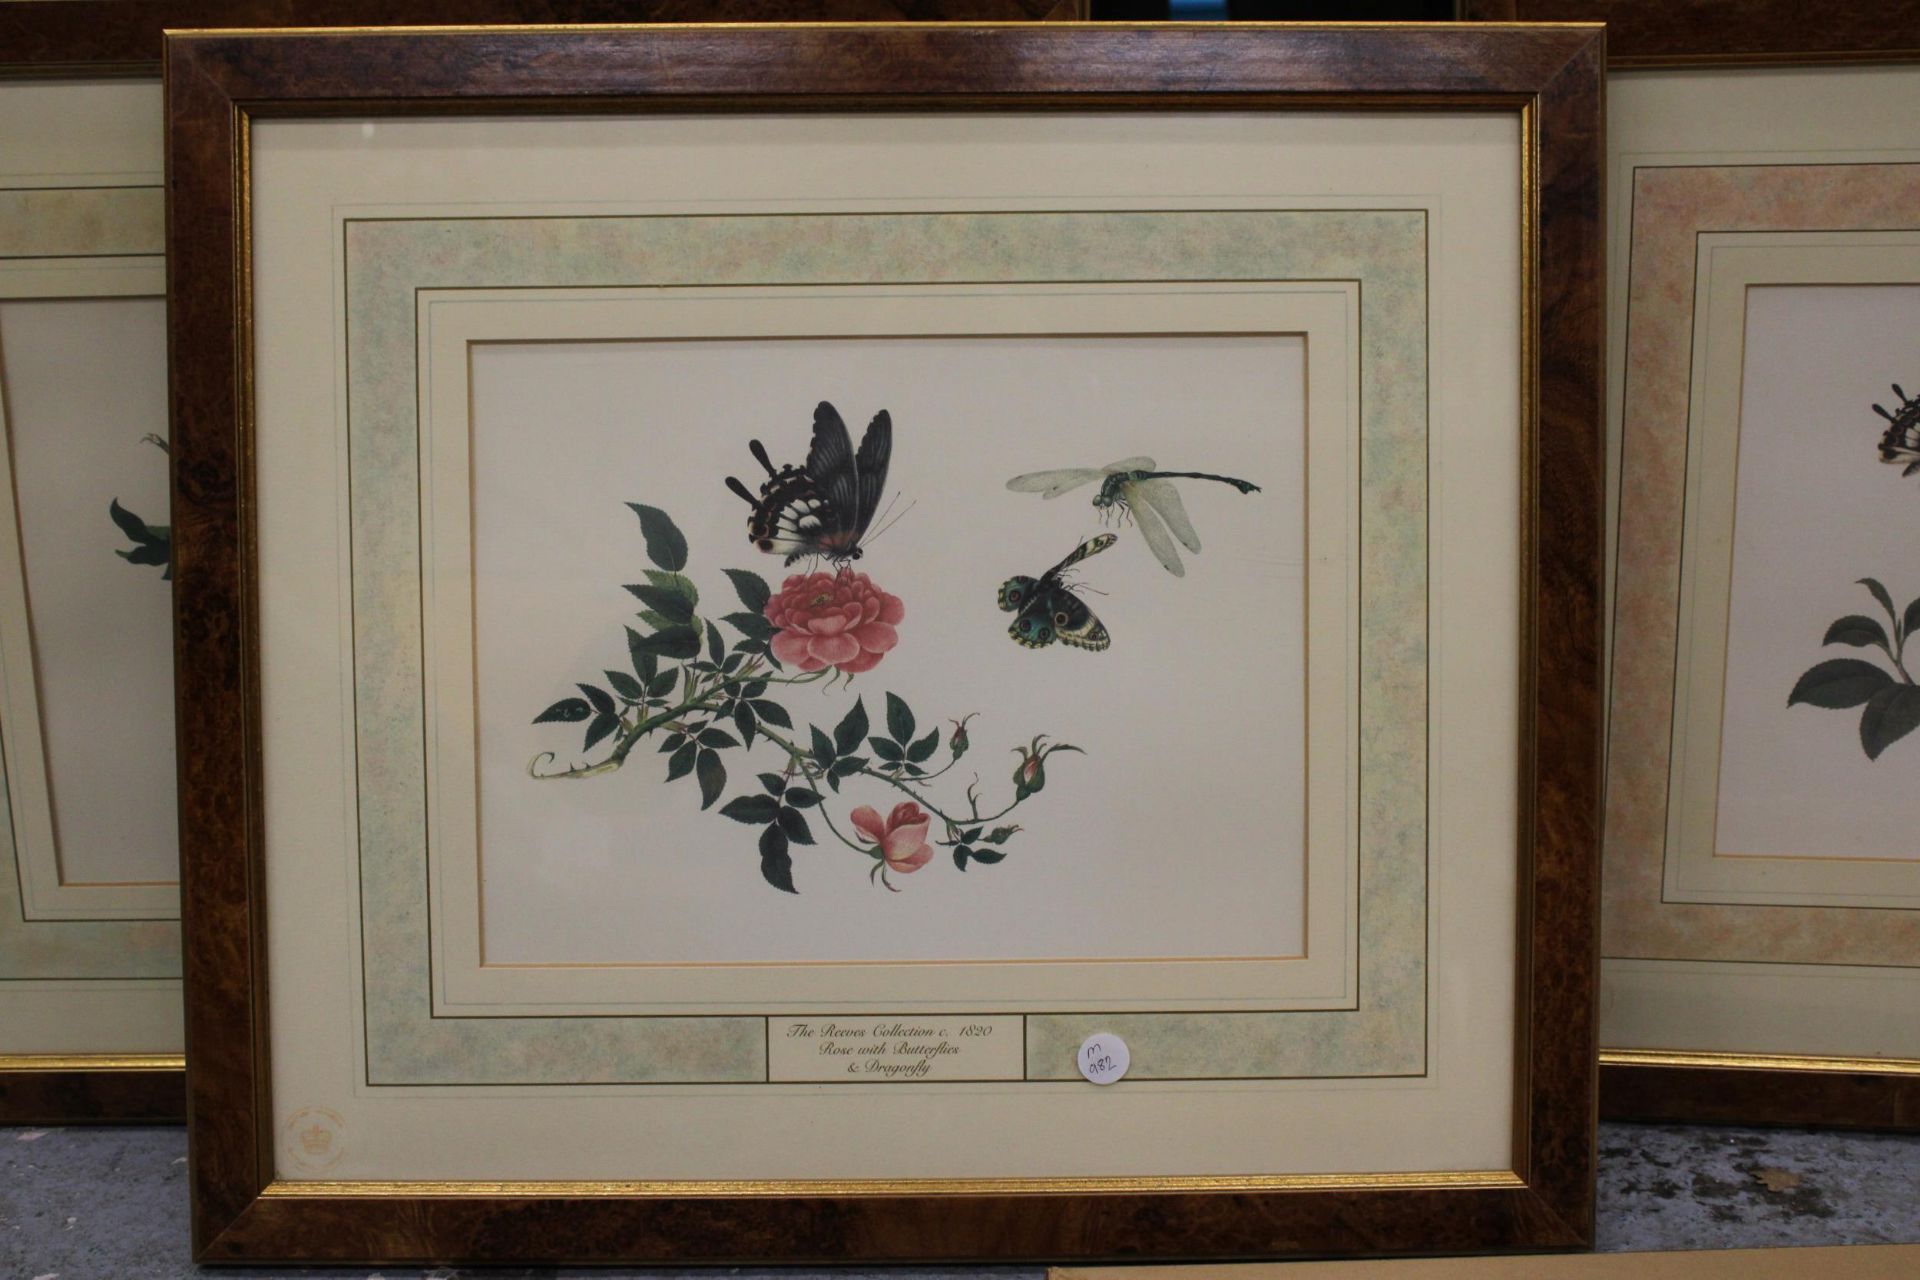 A SET OF FOUR "THE REEVES COLLECTION" FEATURING BUTTERFLIES AND VARIOUS FLOWERS - Image 3 of 3